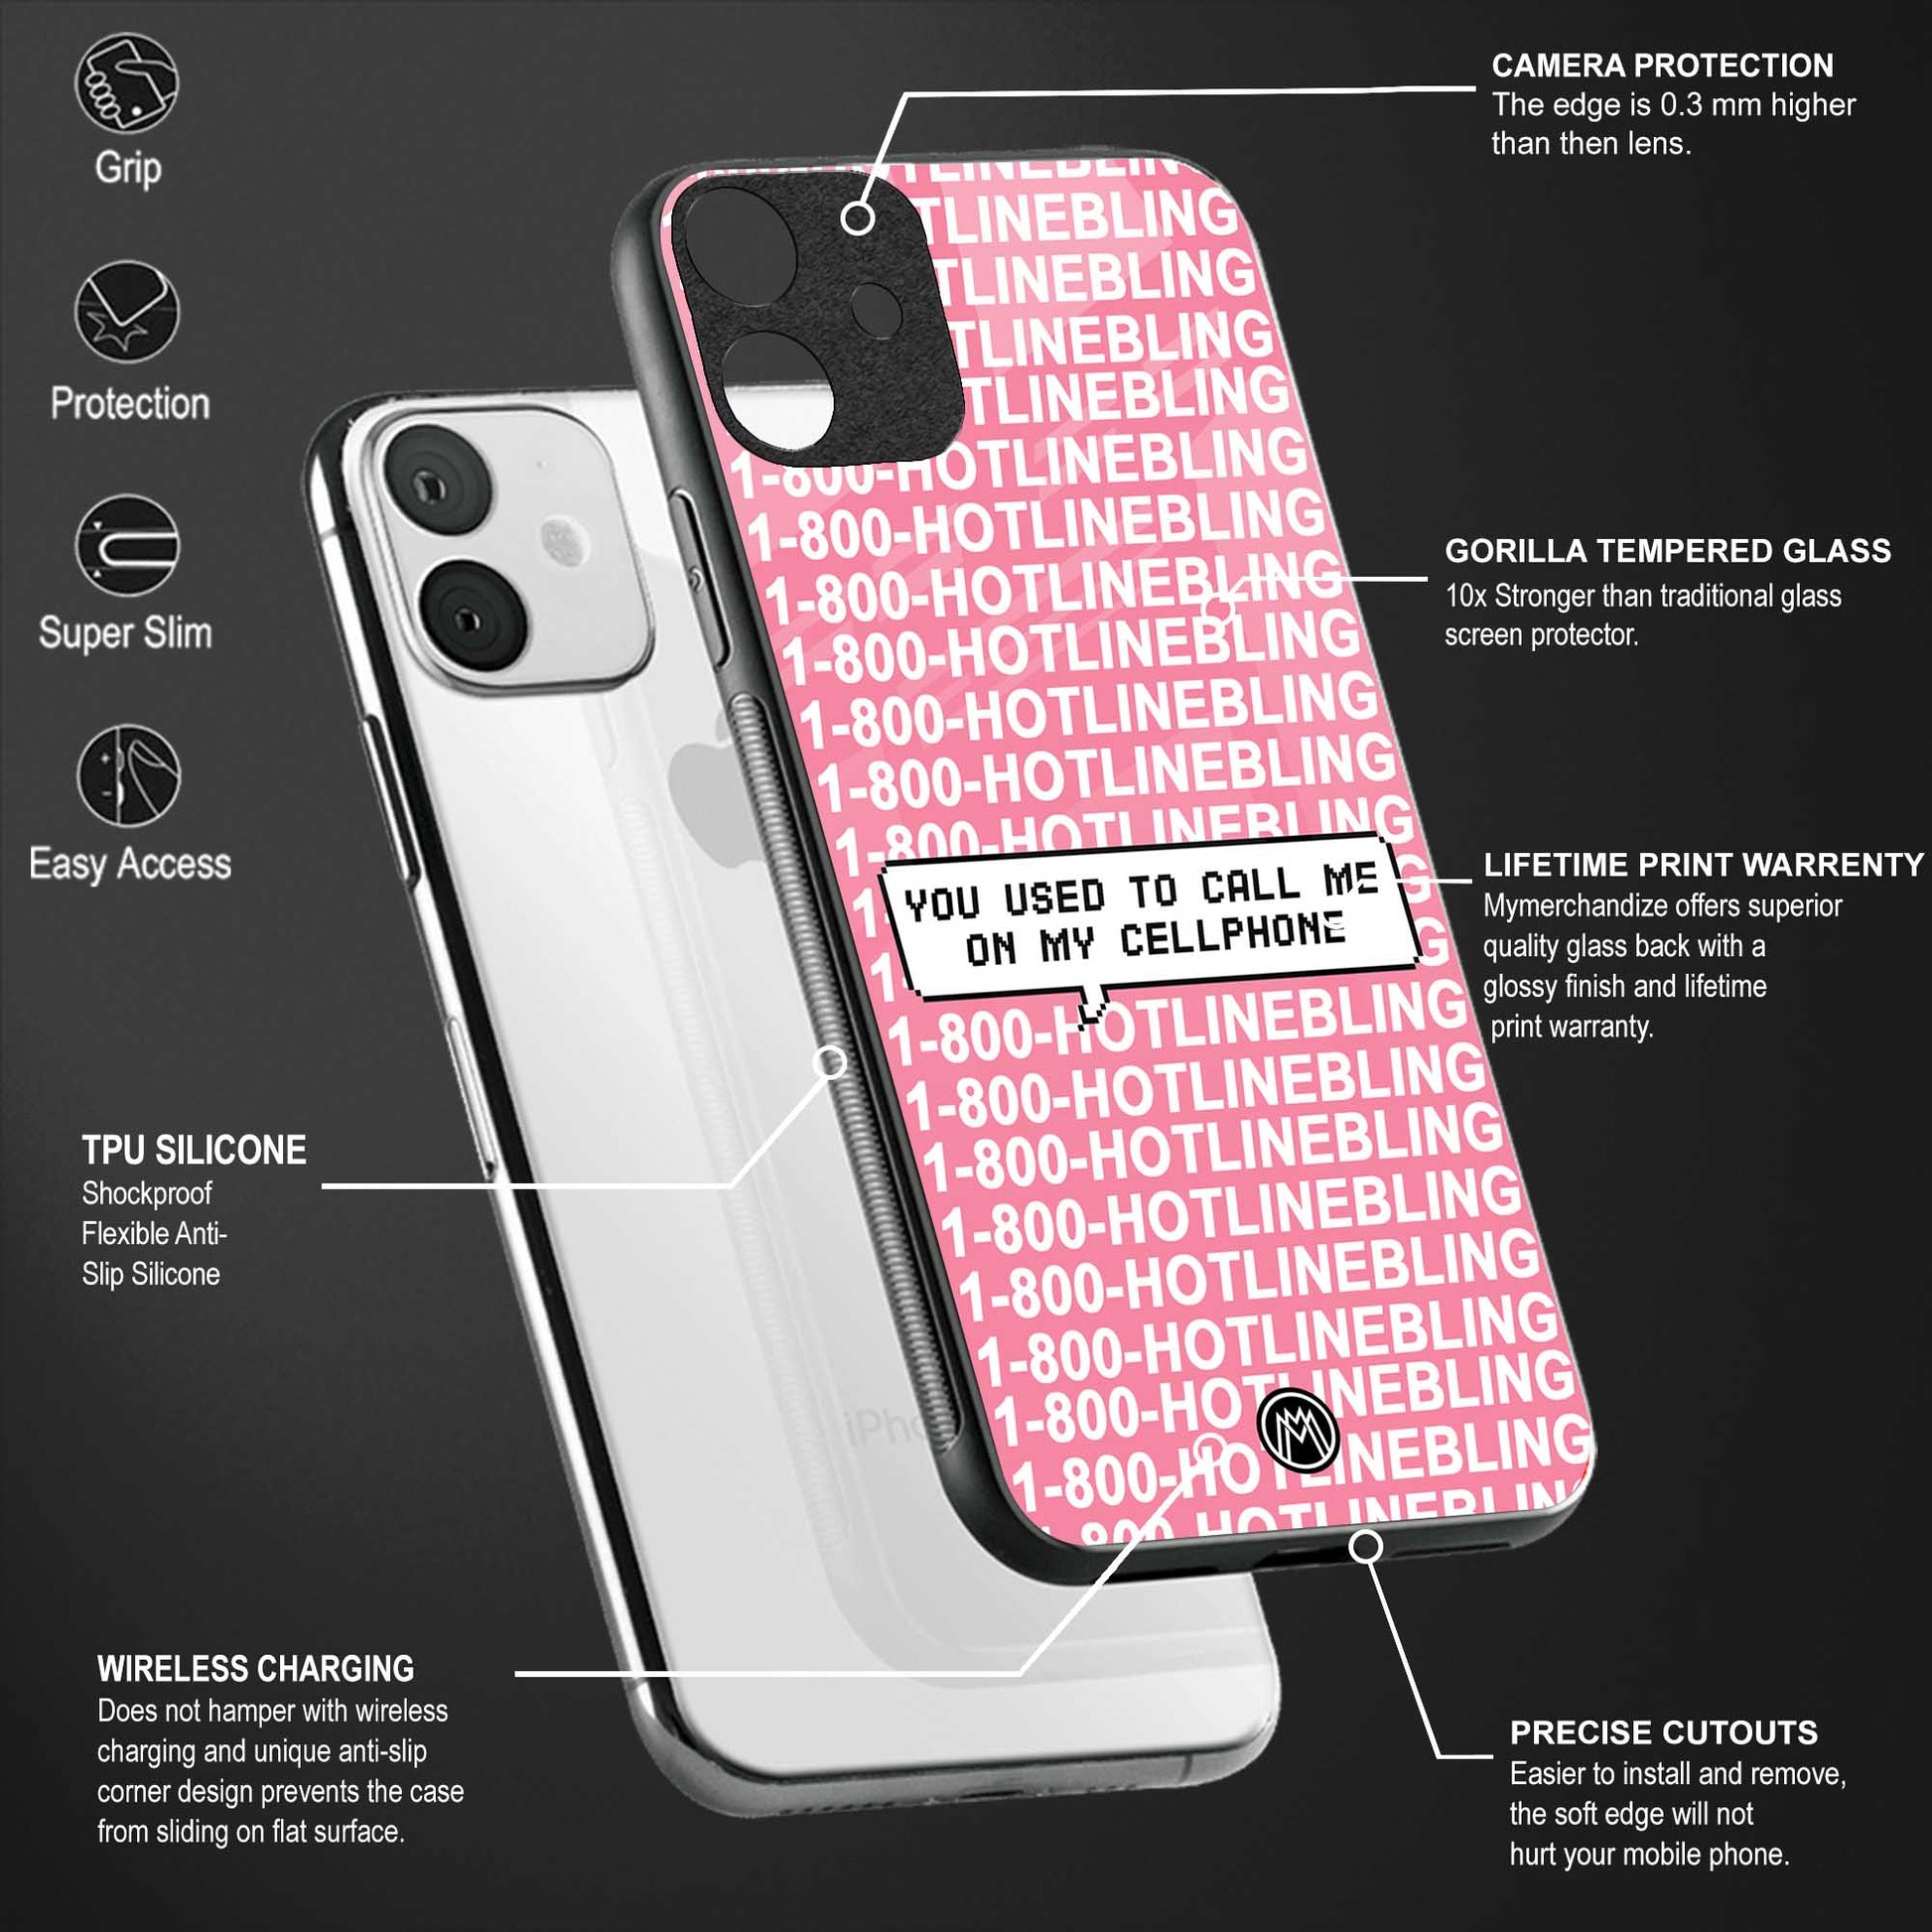 1800 hotline bling phone cover for samsung galaxy f41 